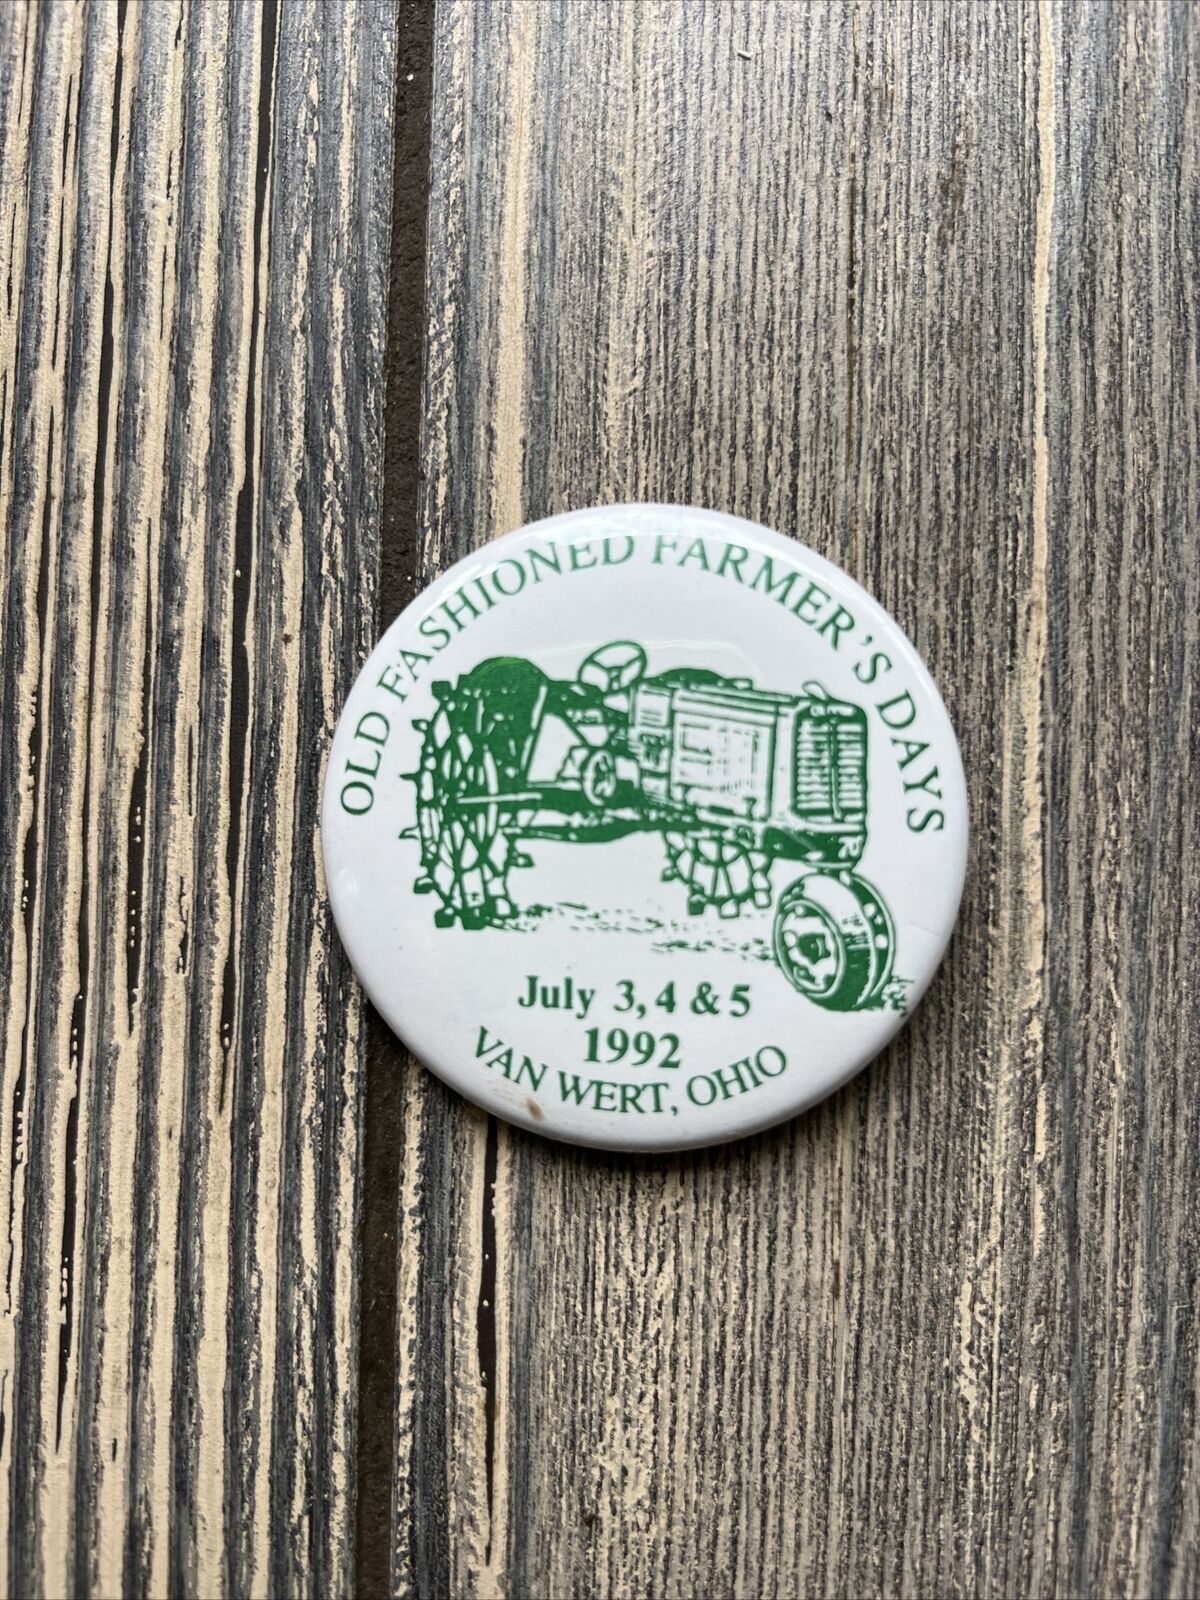 Vintage Pin Button Old Fashioned Farmers Days 1992 Van Wert Ohio